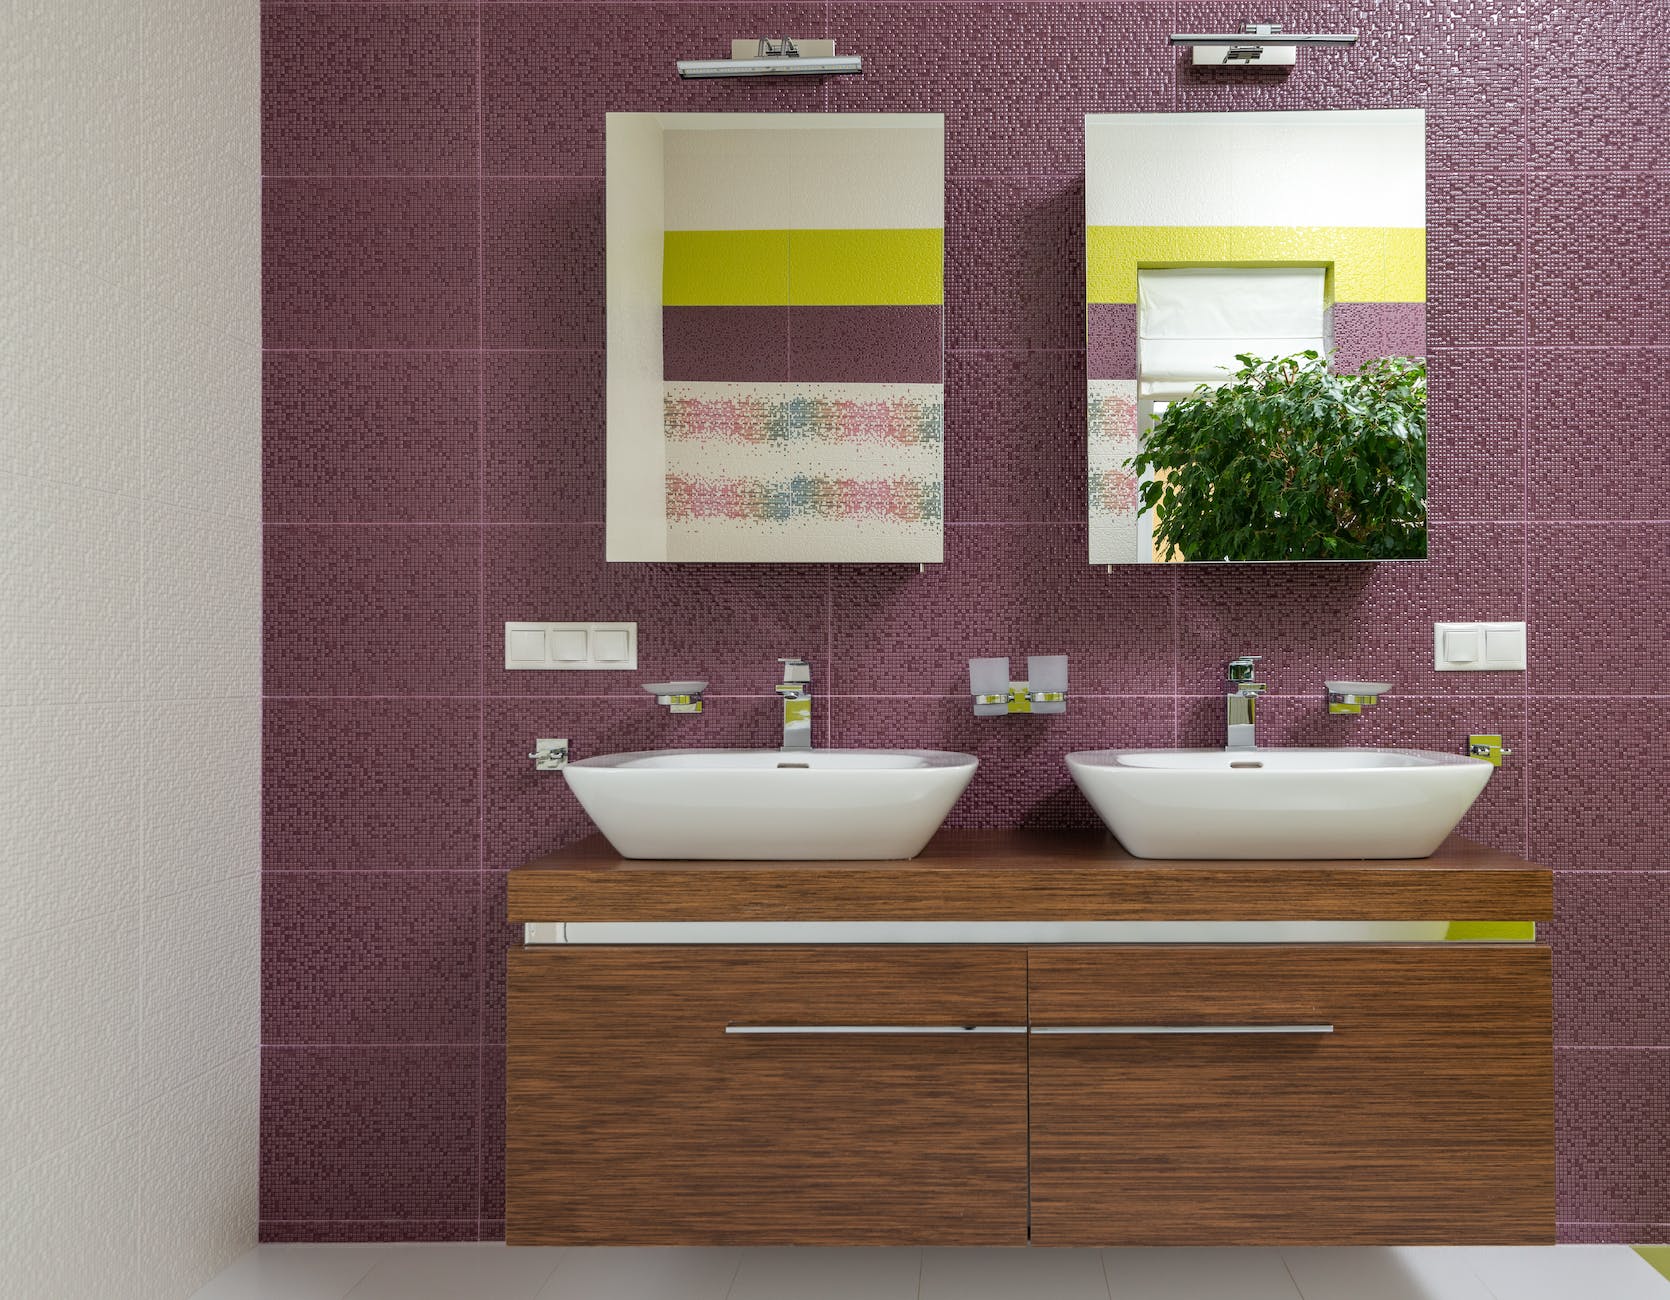 How to Decorate a Small Purple Bathroom